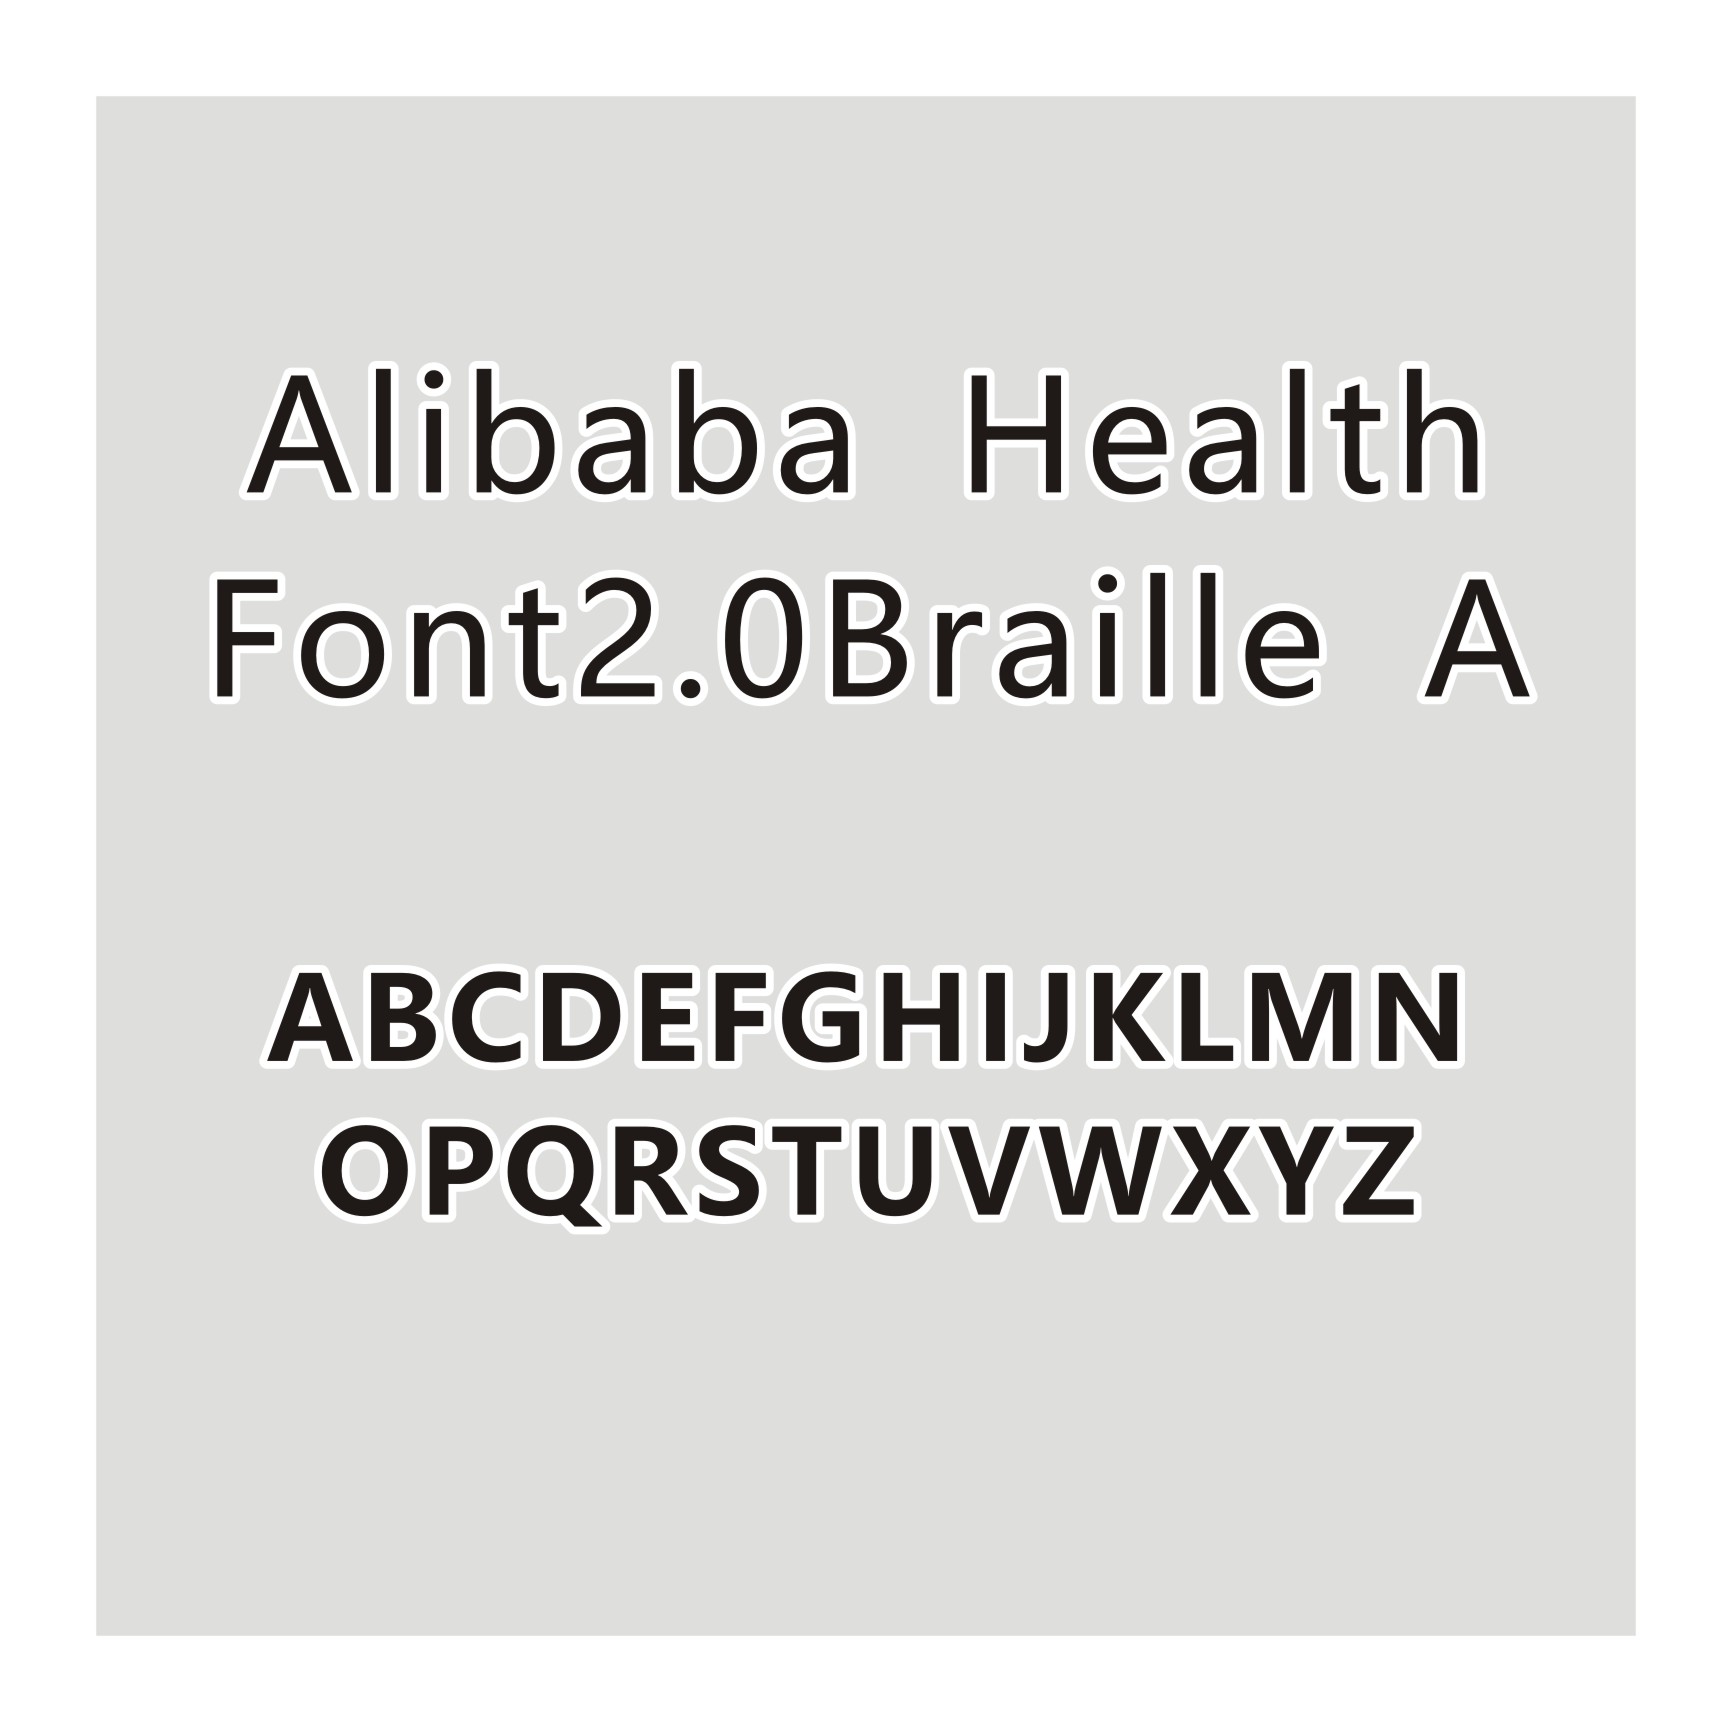 Alibaba Health Font2.0Braille A